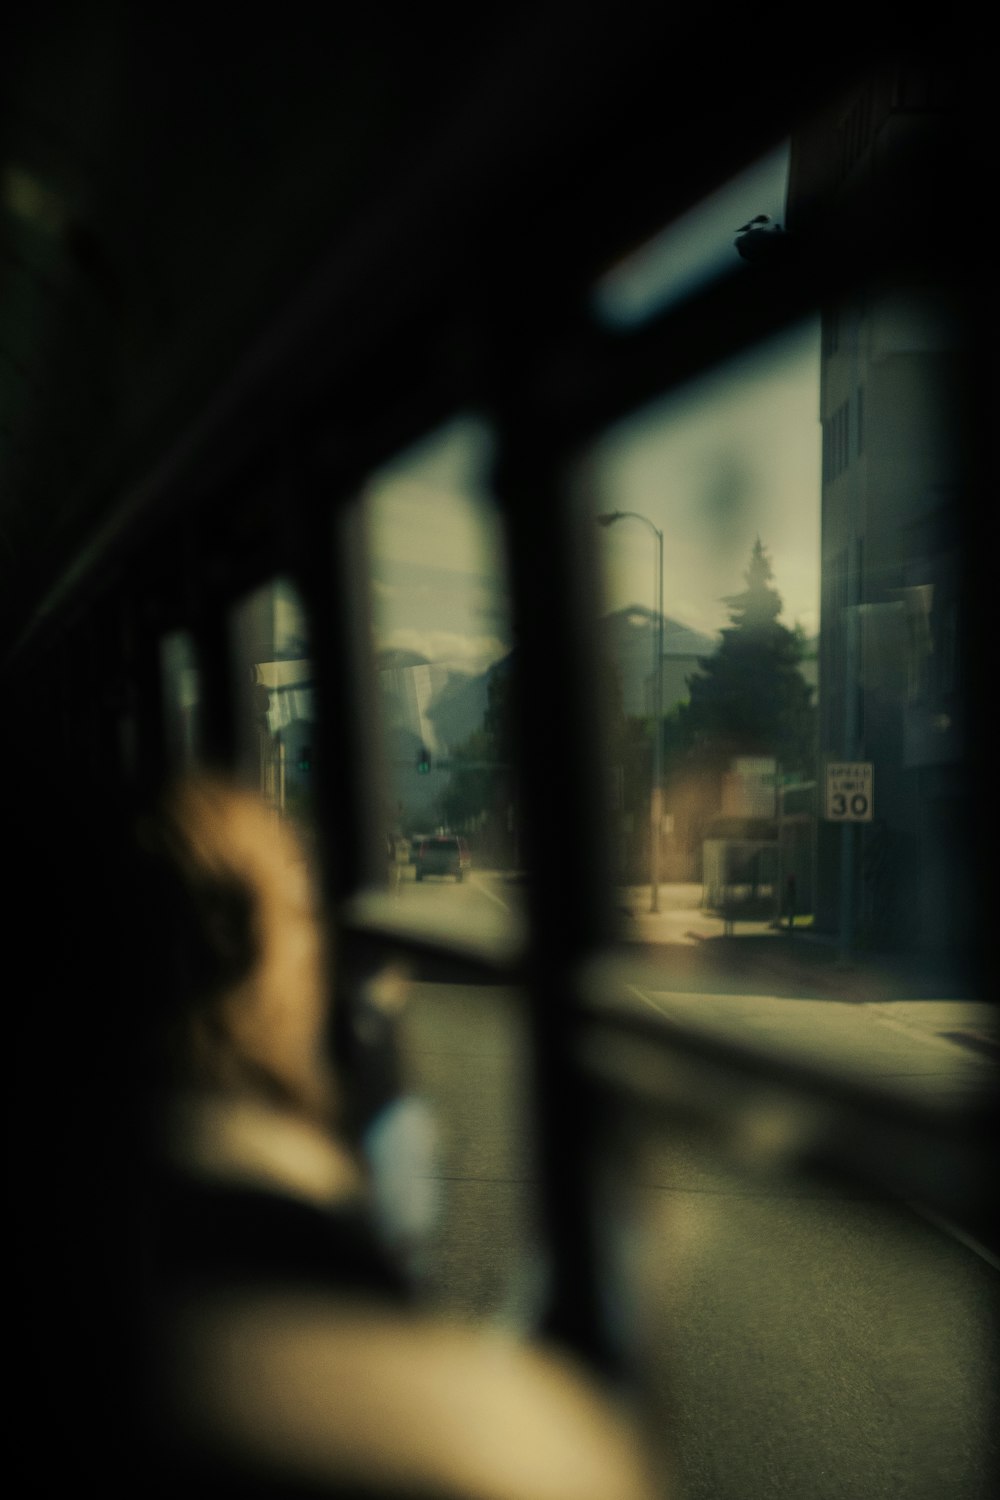 a view of a street from a bus window